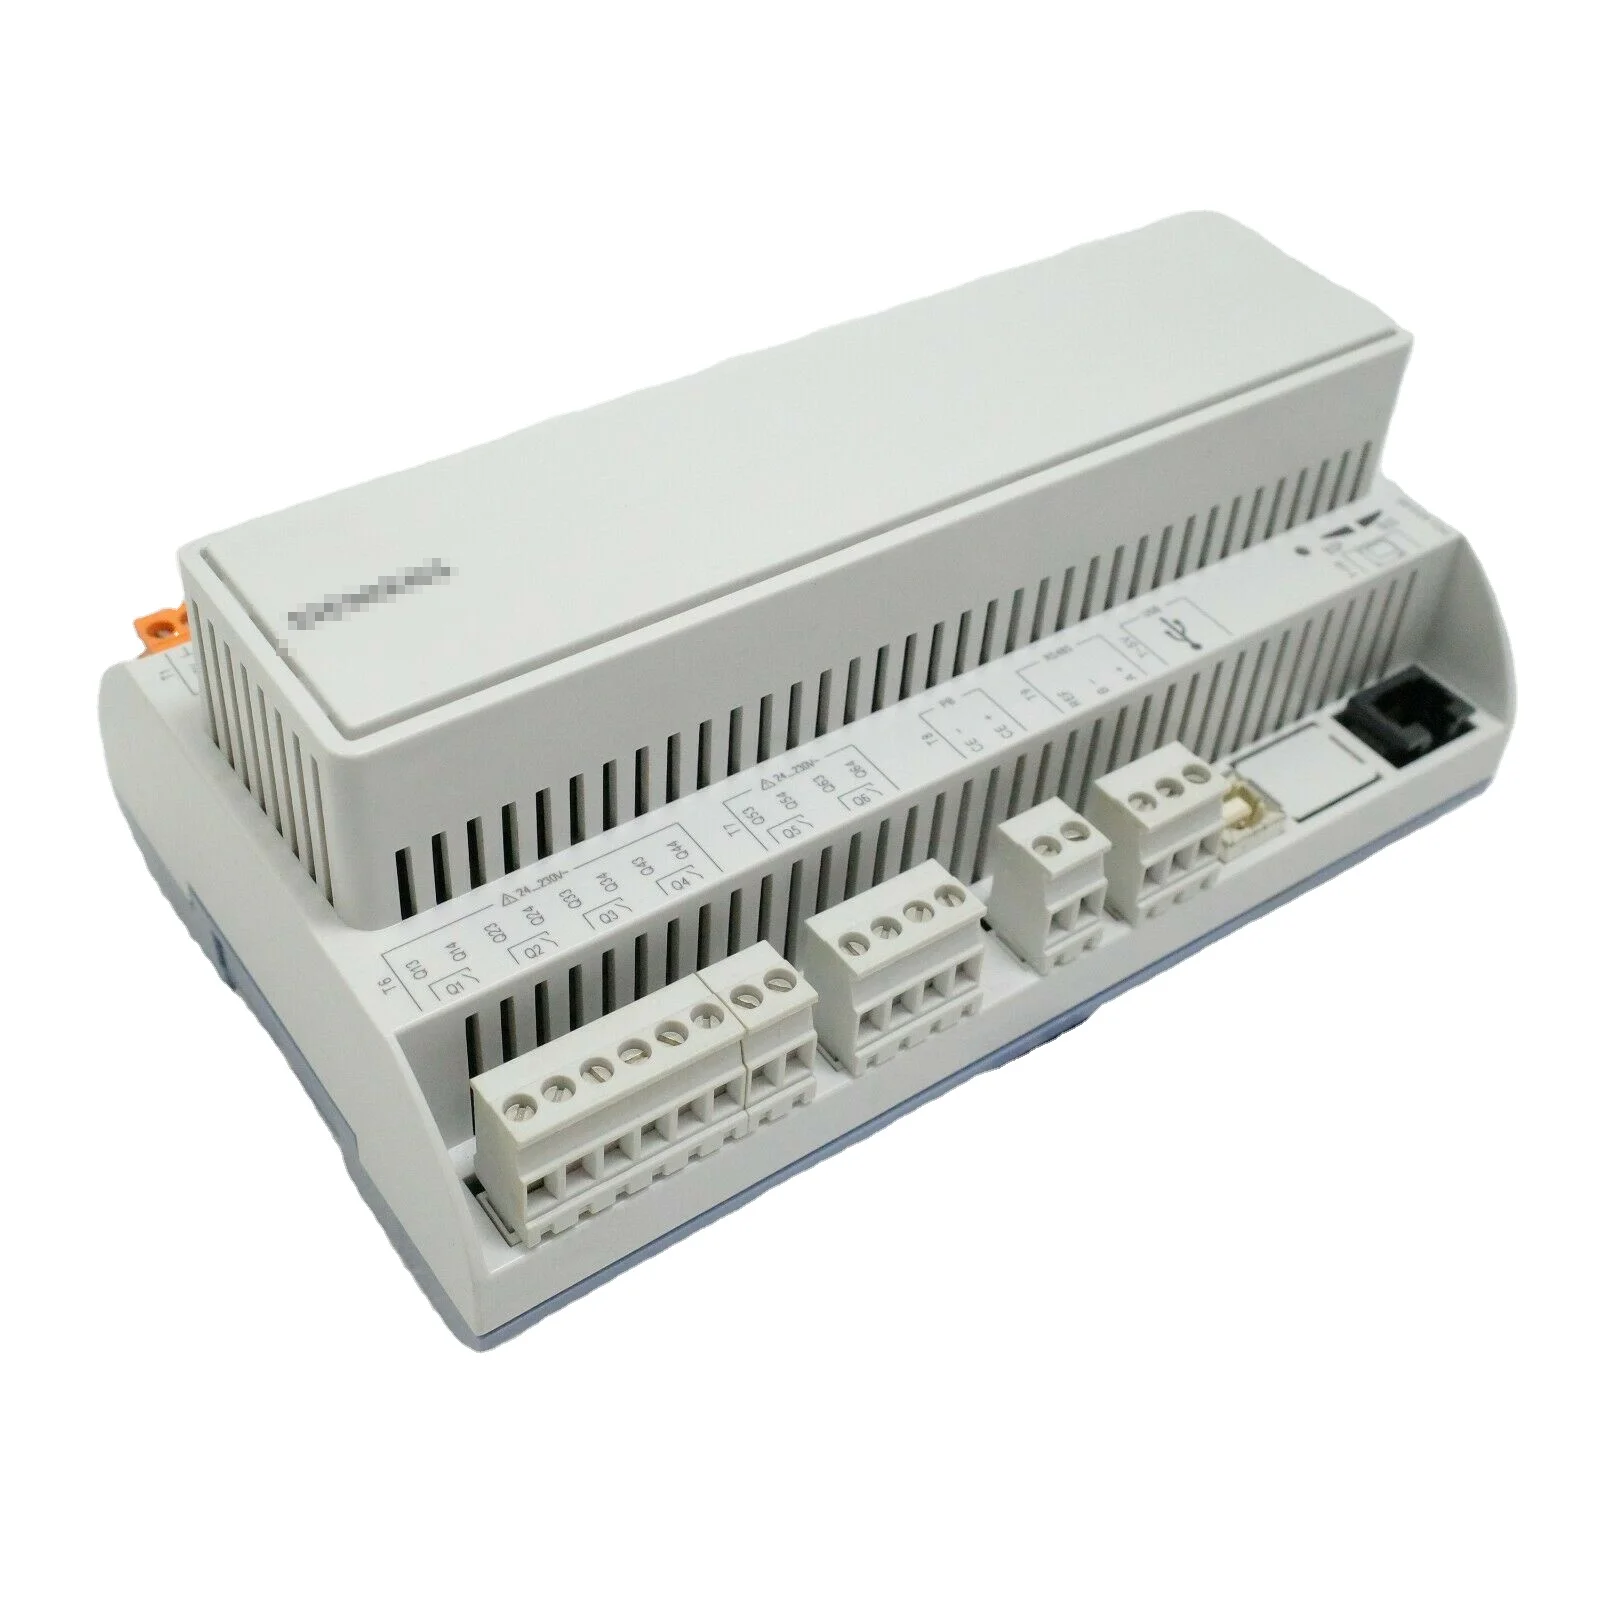 Used In Good Condition DDC Programmable Controller POL635.00 POL424.50/STD POL424.50 POL424 enlarge